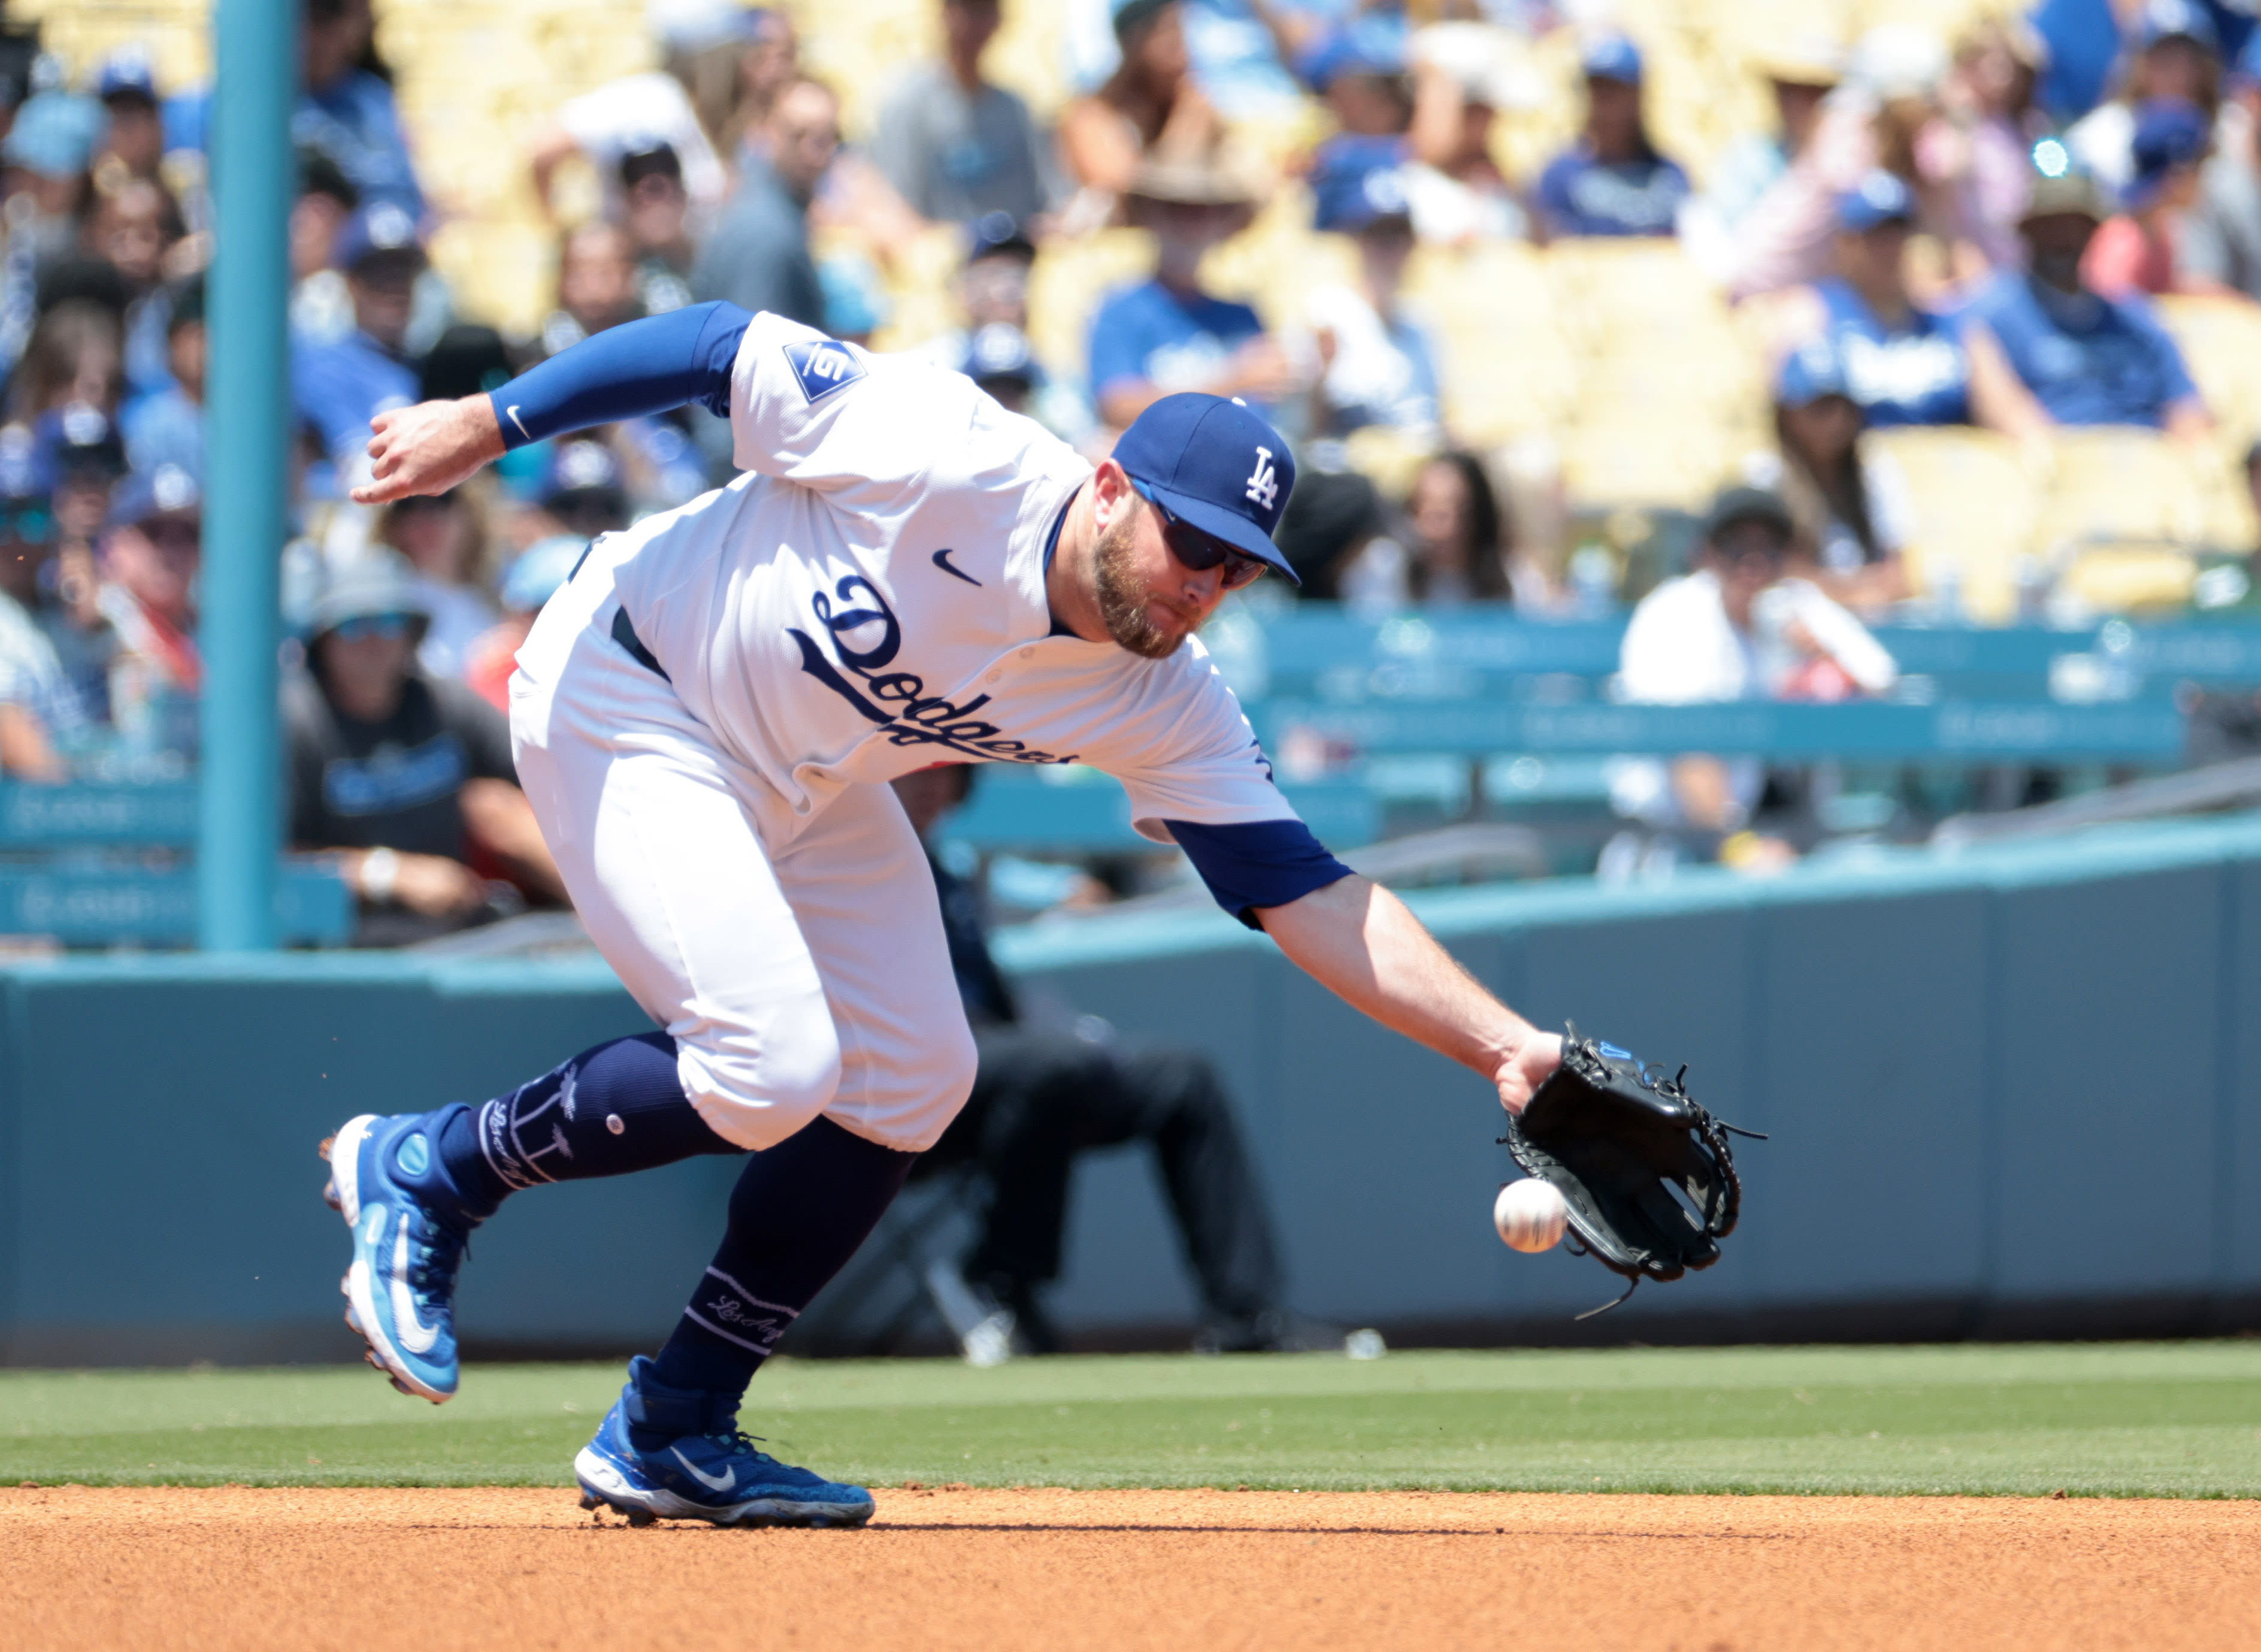 The Sports Report: How Max Muncy stepped it up on defense